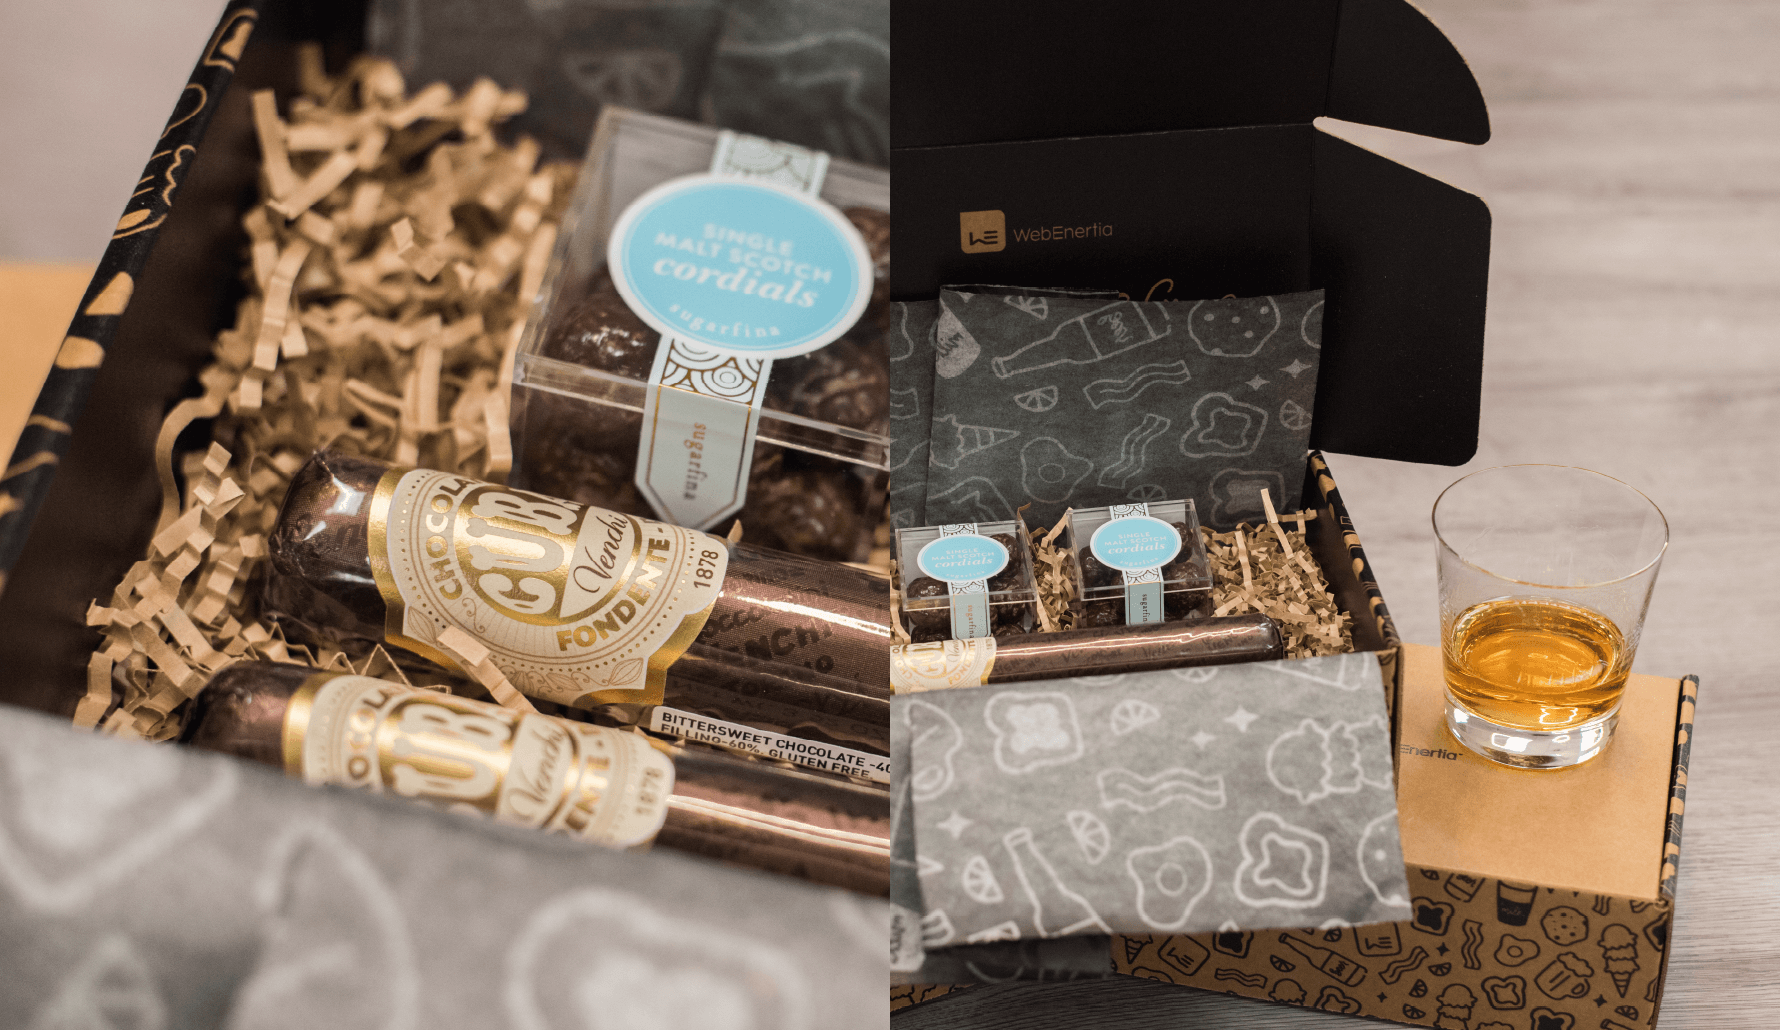 Clear Digital Together We're Better Sugarfina sweets and chocolate cigars